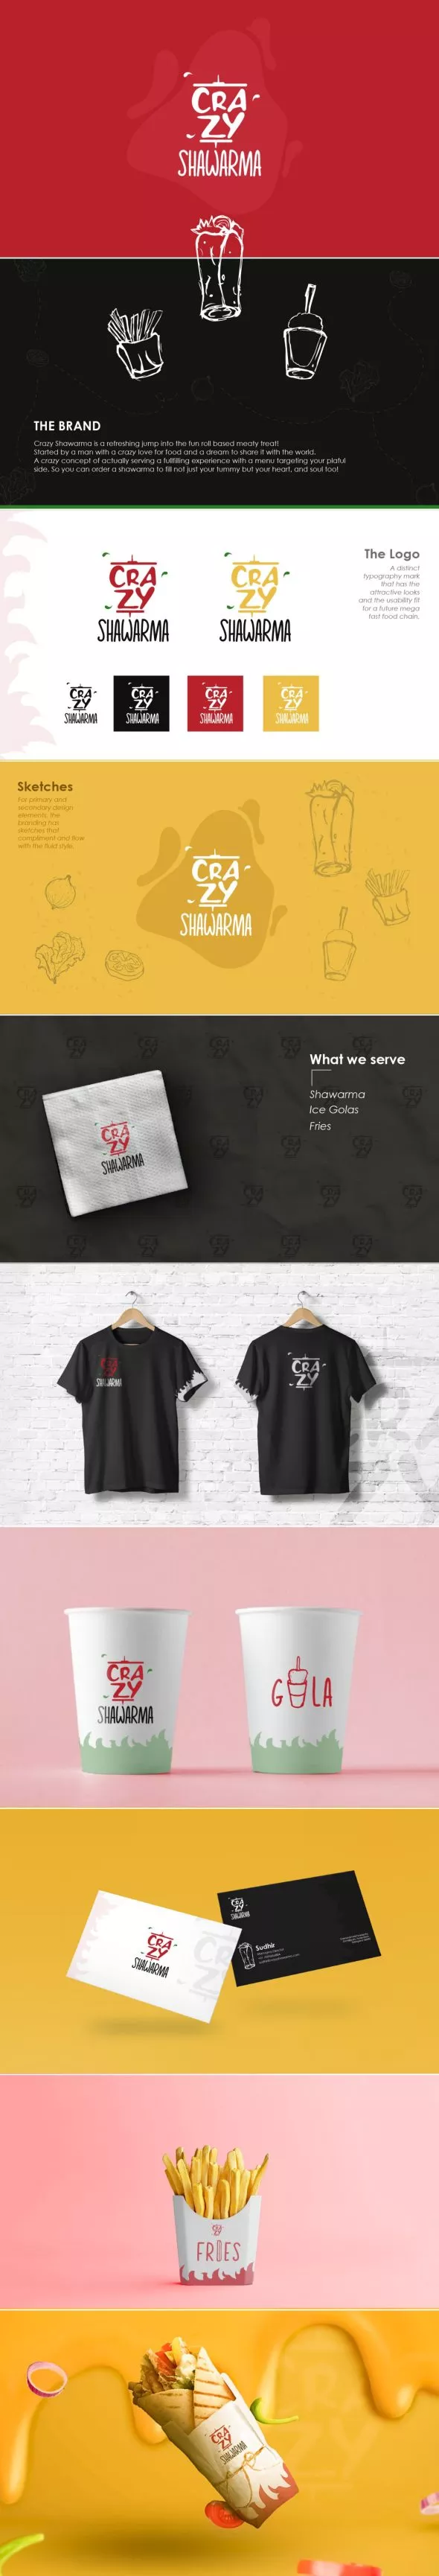 Shwarma logo and branding with packaging and shirt design for staff